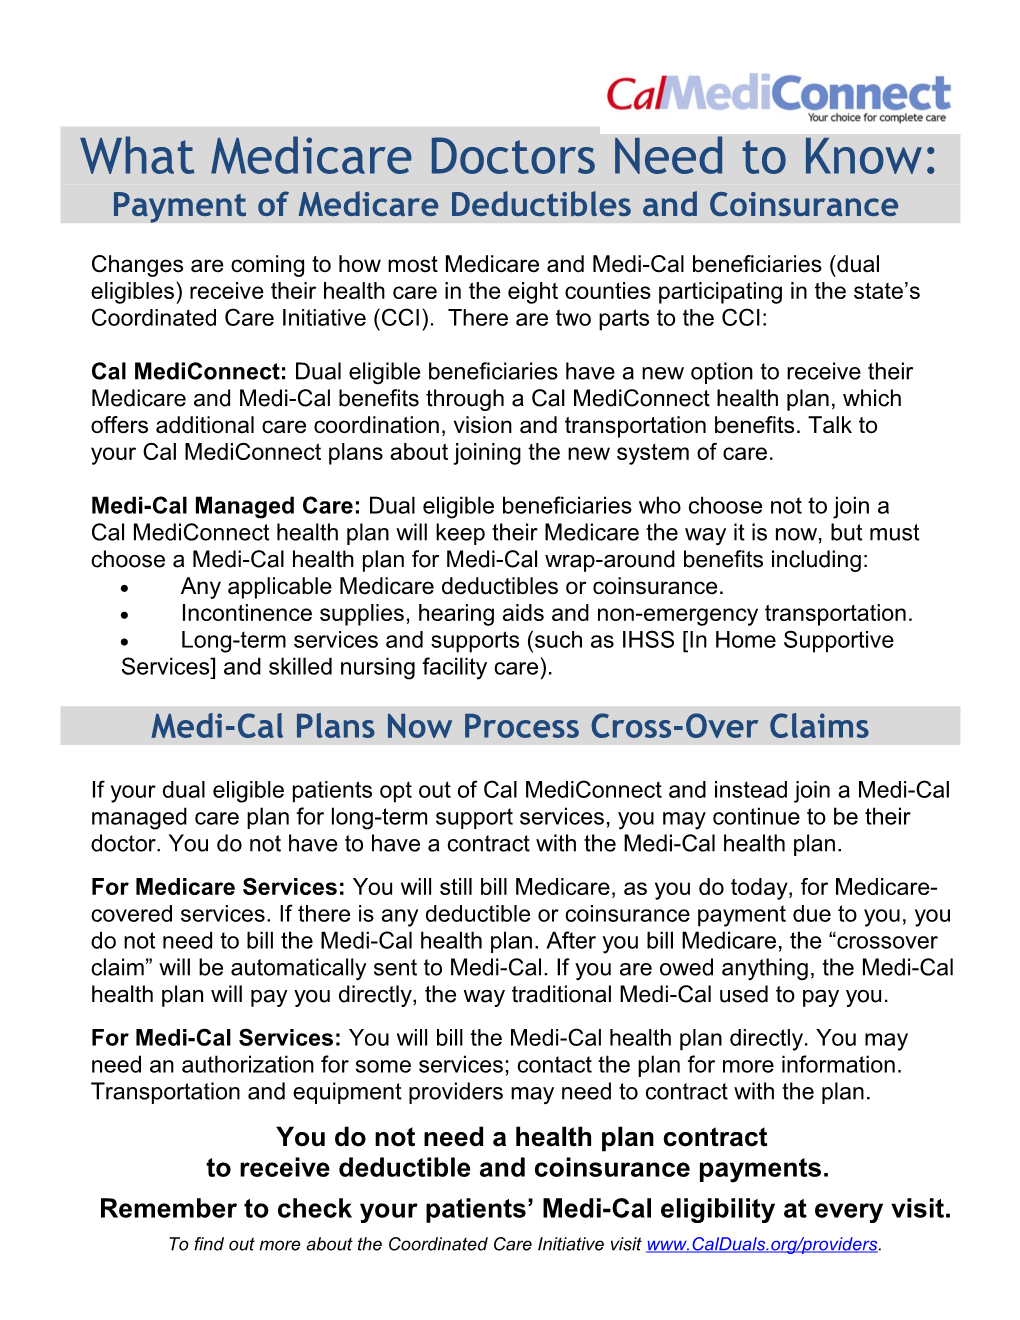 Payment of Medicare Deductibles and Coinsurance